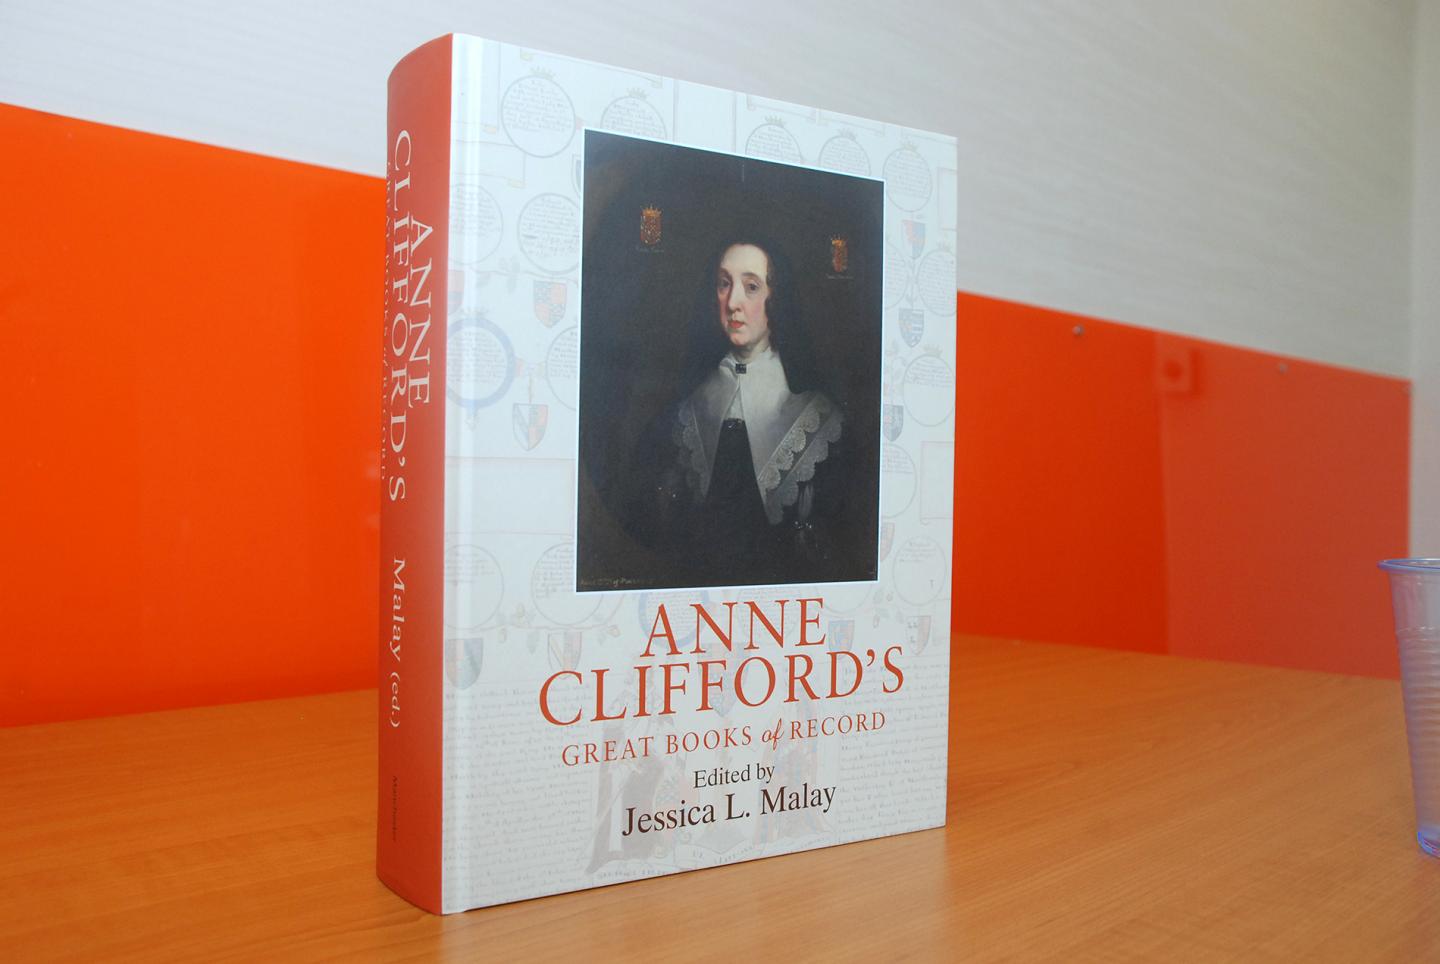 Anne Clifford's Great Books of Record